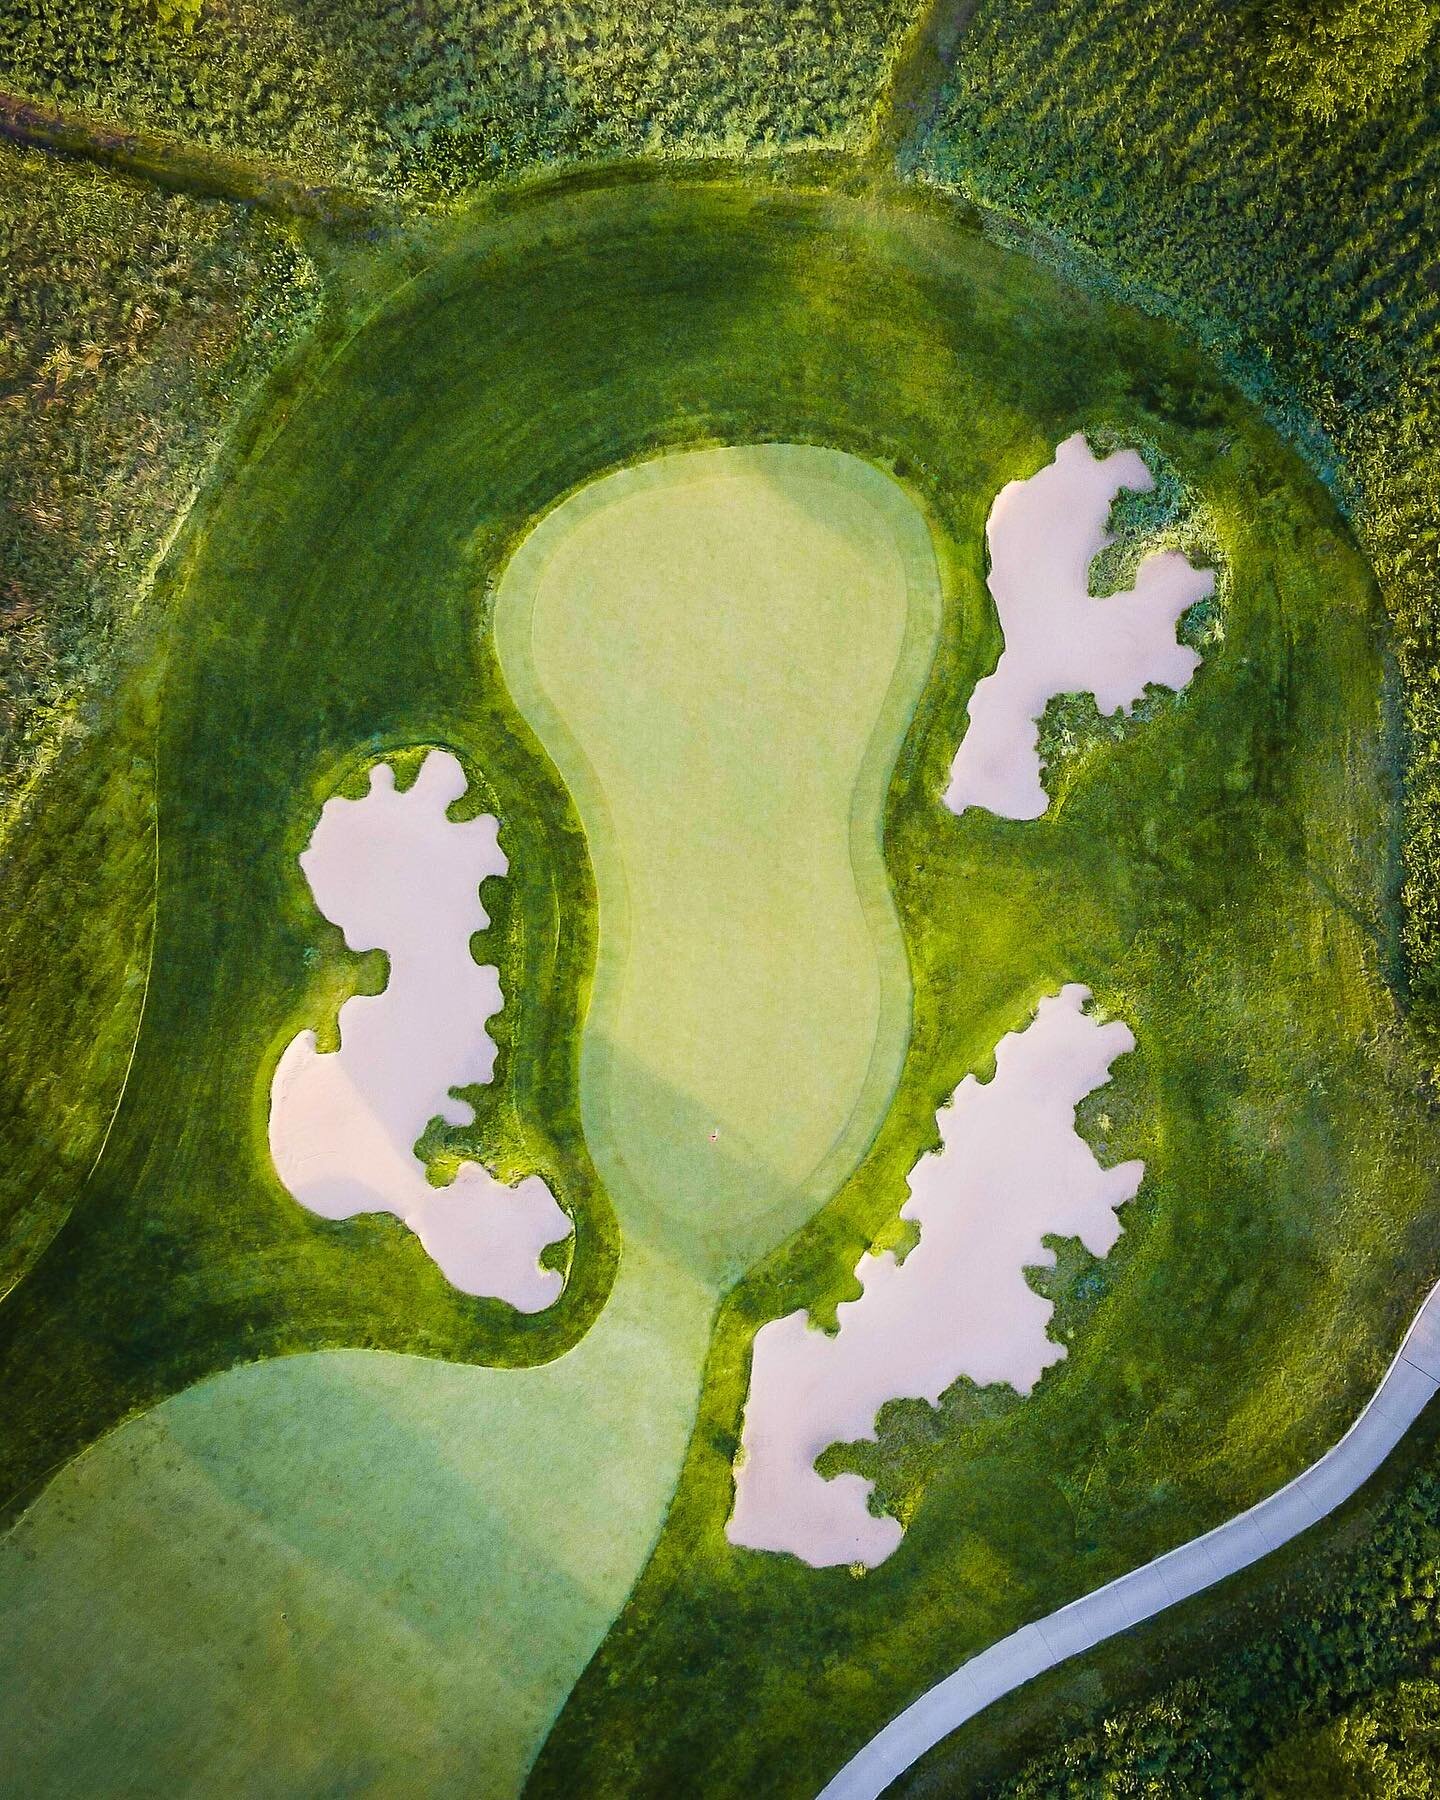 @arborlinks pays homage to Old World strategy, rewarding disciplined play with careful access to greens encased in an atlas of native rough and gouged-out bunkers. #GreensofDreams #Fore #dormienetwork